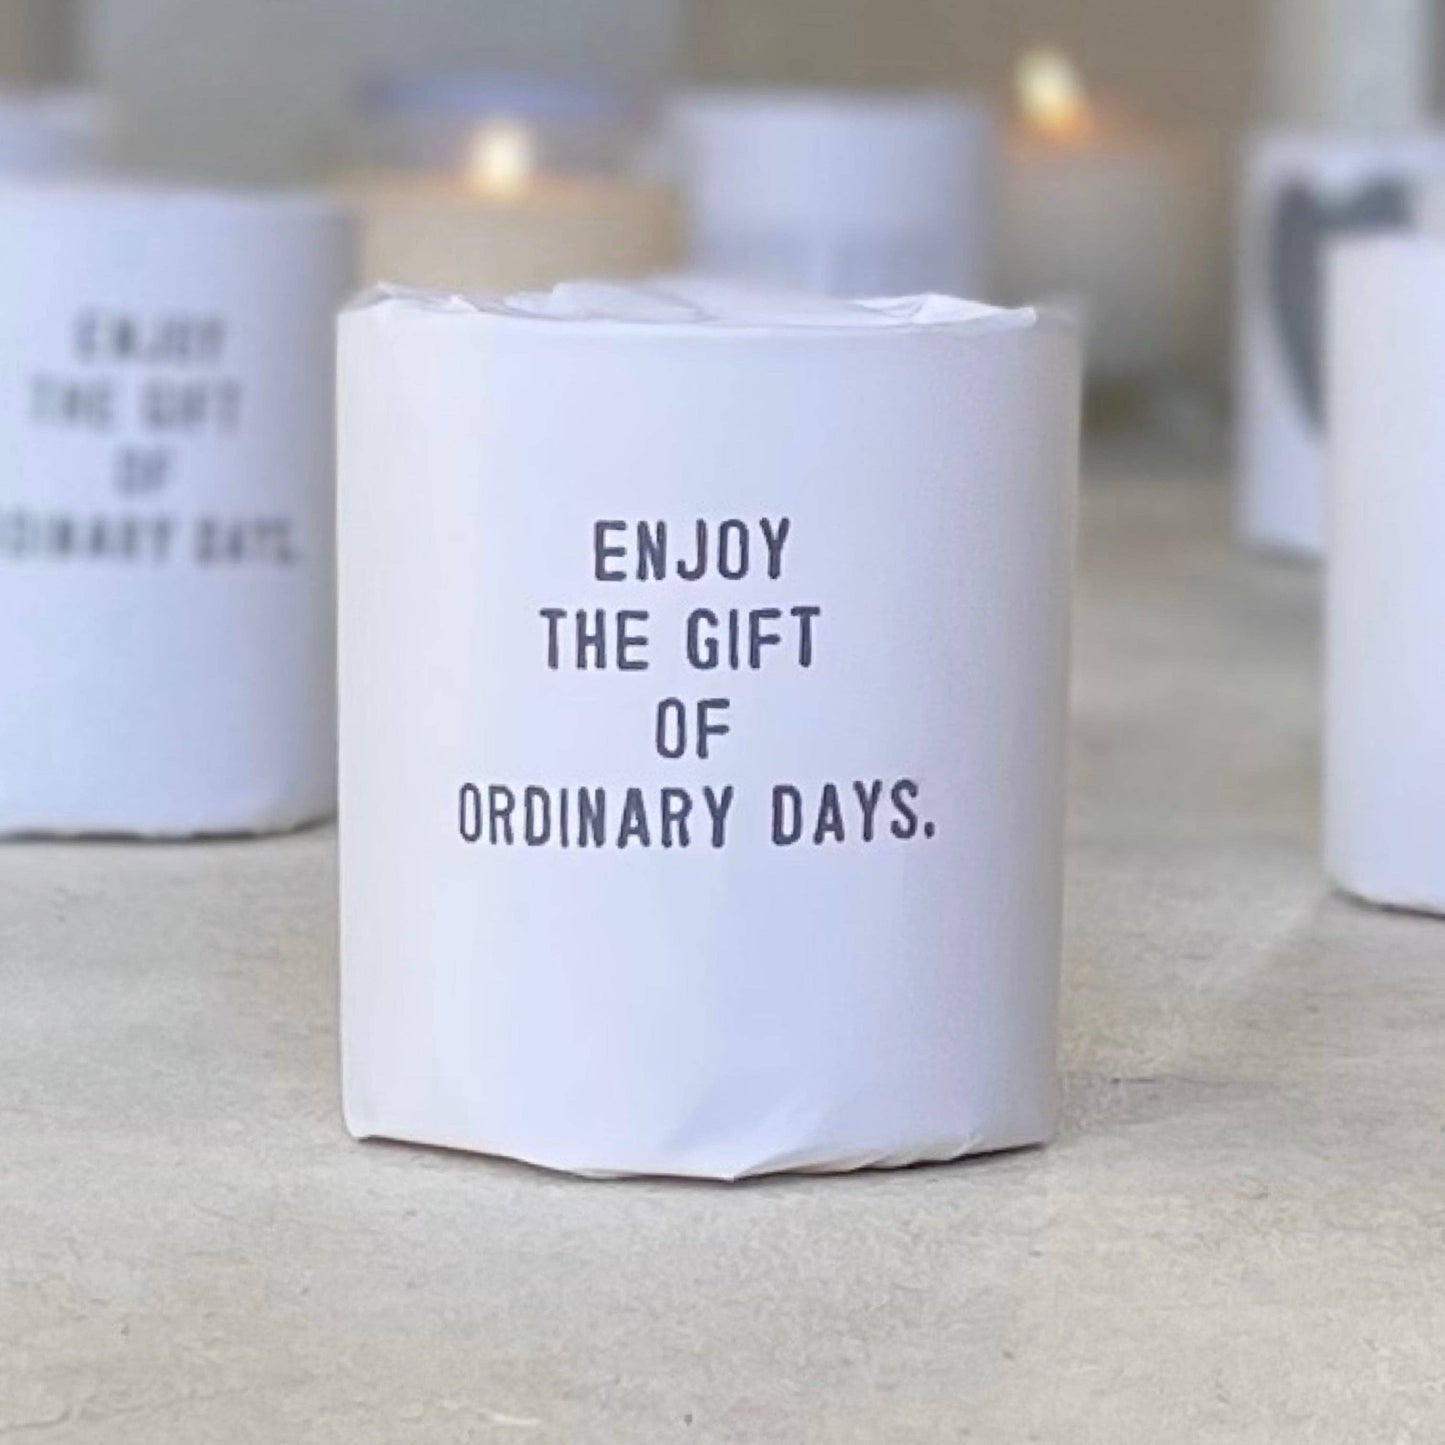 Enjoy The Gift Of an Ordinary Day.